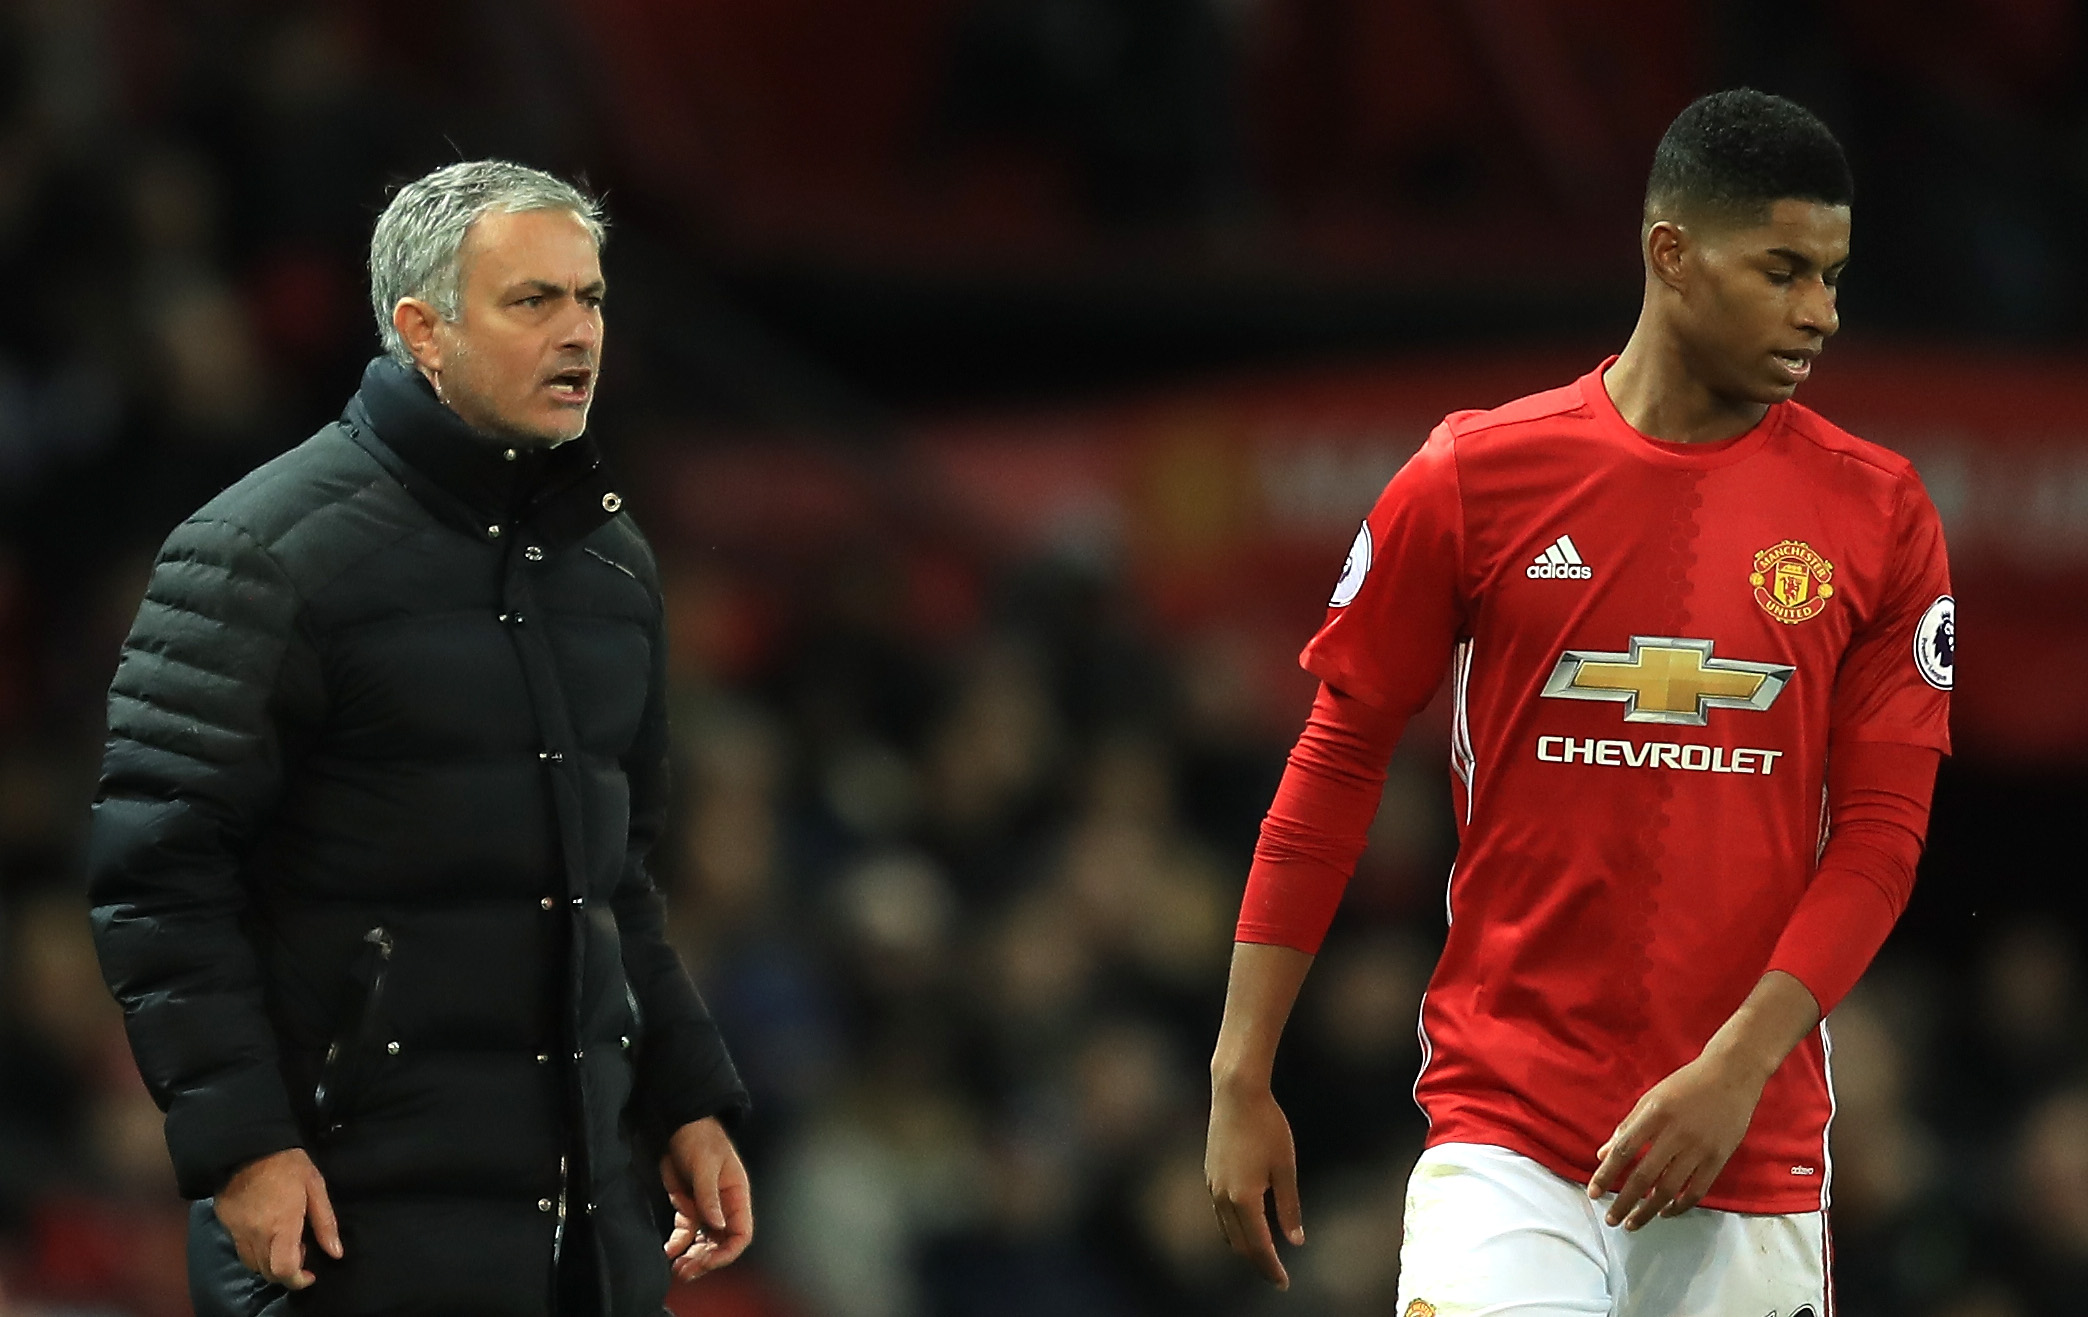 MANCHESTER, ENGLAND - DECEMBER 11: Jose Mourinho, Manager of Manchester United gives instruction to Marcus Rashford during the Premier League match between Manchester United and Tottenham Hotspur at Old Trafford on December 11, 2016 in Manchester, England. (Photo by Richard Heathcote/Getty Images)